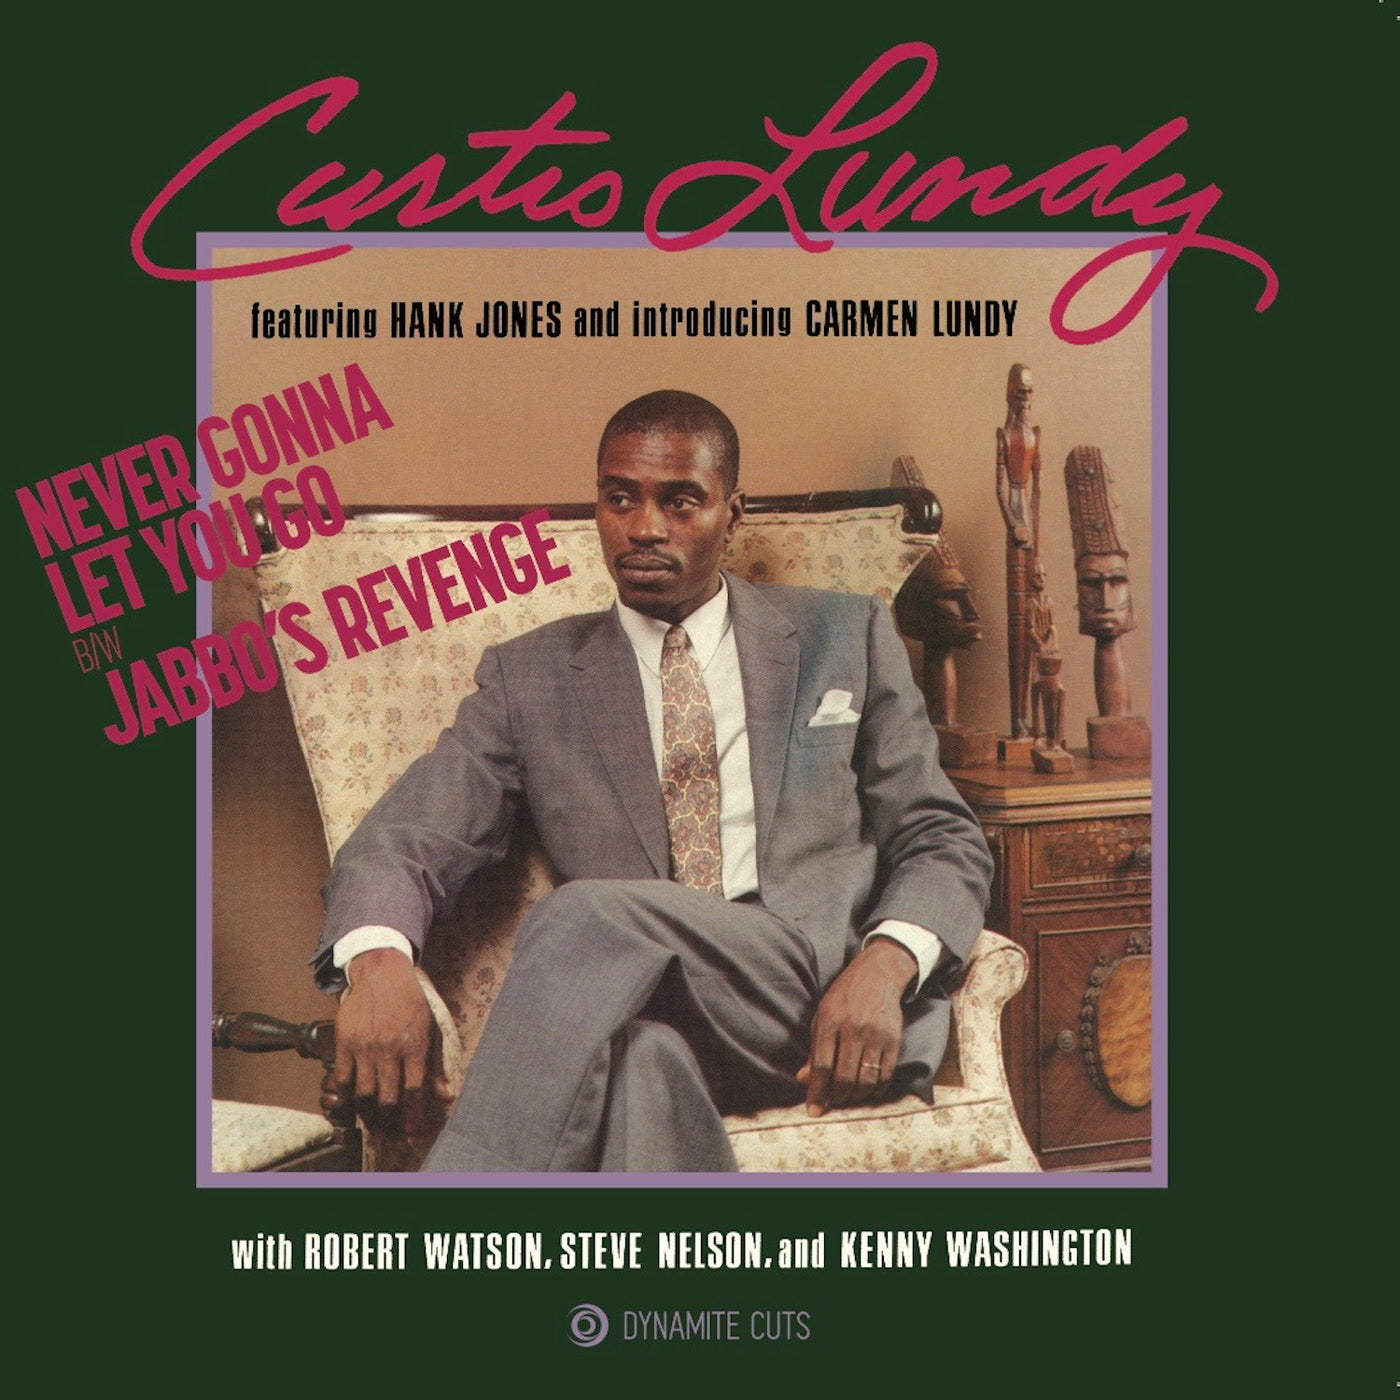 Curtis Lundy - Never Gonna Let You Go / Jabbos Revenge - Dynamite Cuts - 7" Last 2